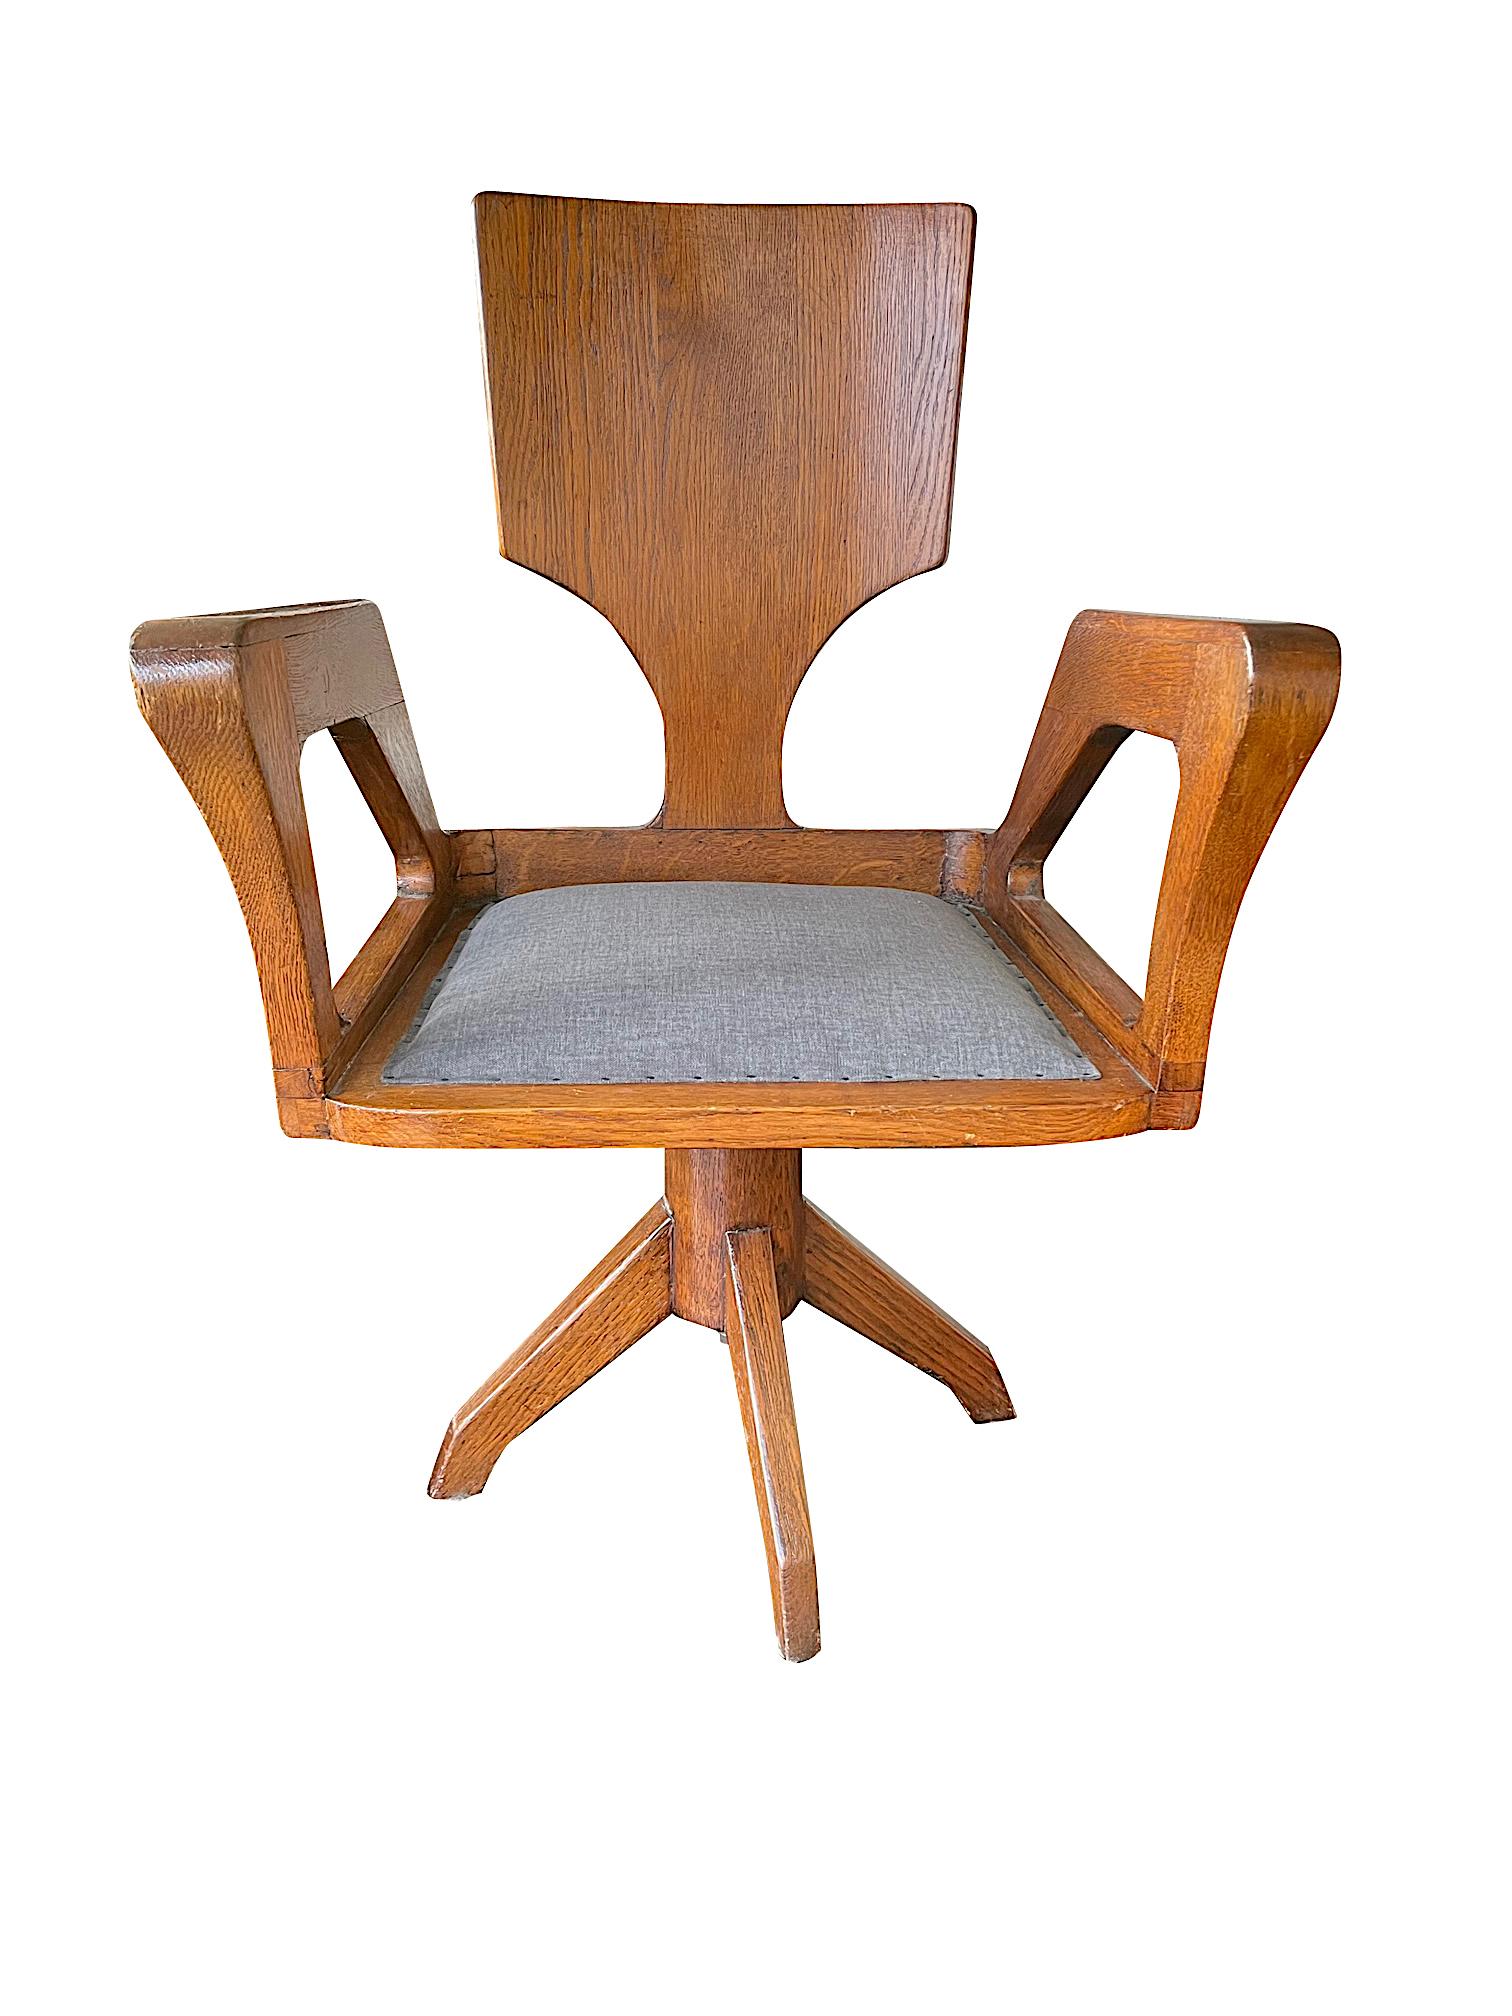 Italian Grey Fabric Seat Swivel Wood Sculptured Desk Chair, Italy, 1930s For Sale